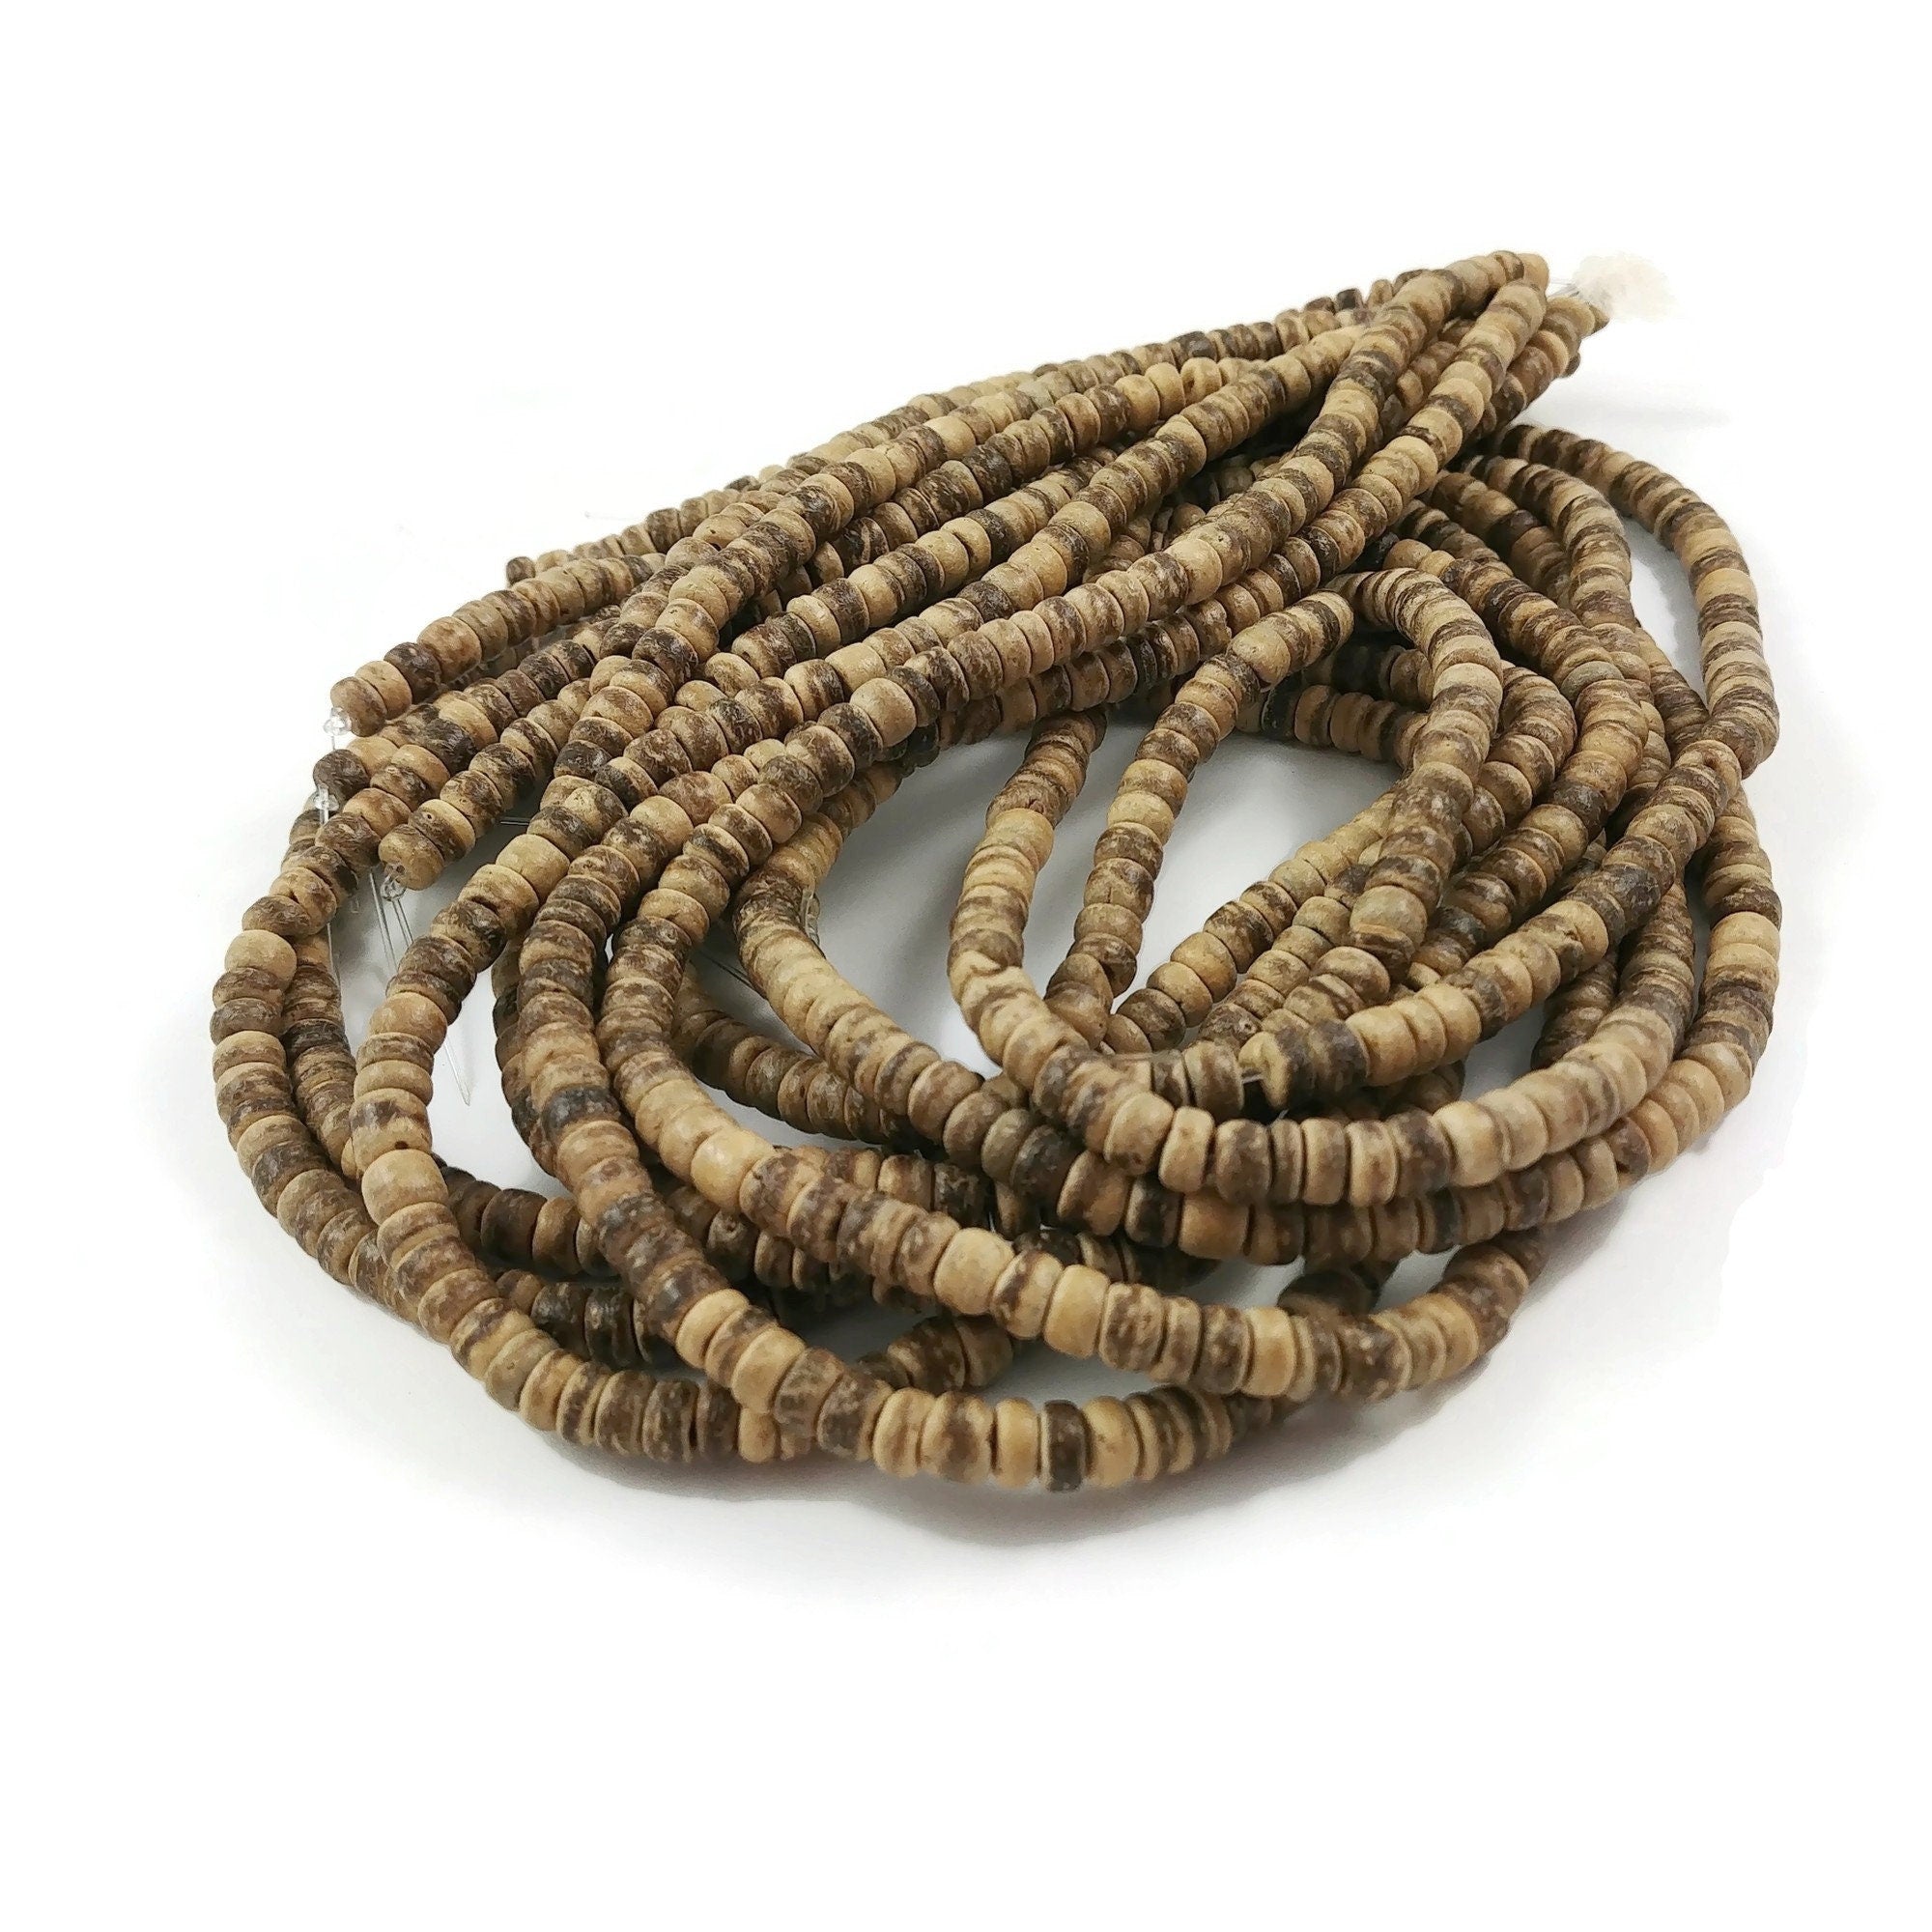 Natural coconut wood beads 5mm rondelle heishi spacers, Jewelry making